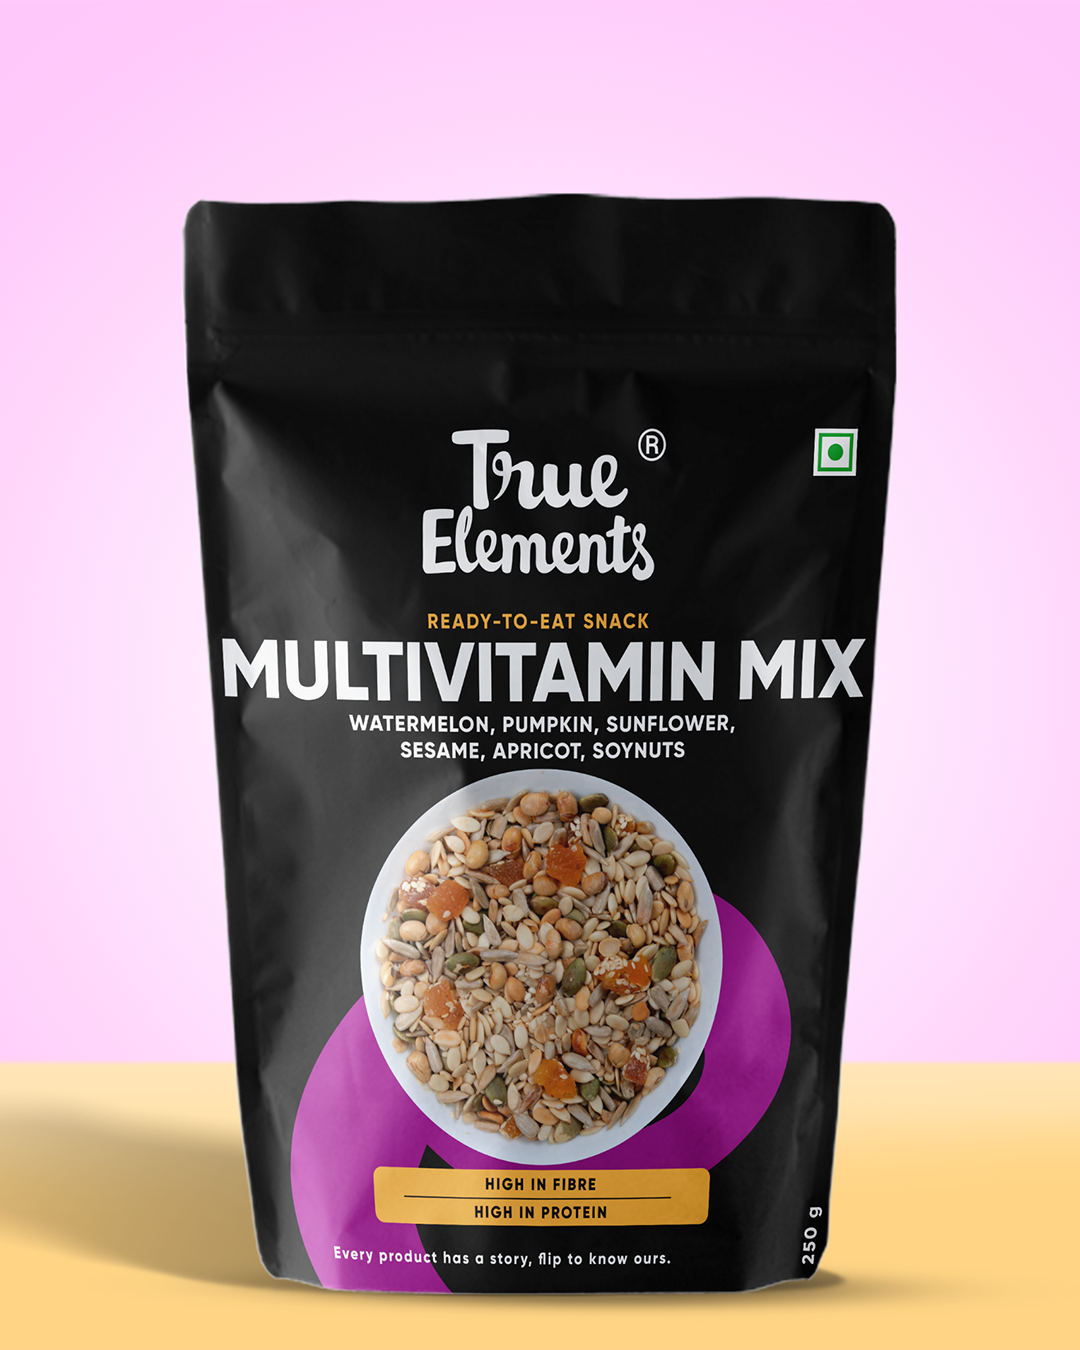 True elements Multivitamin mix 250g Pouch consisting watermelon, pumpkin, sunflower, sesame, apricot and soynuts.